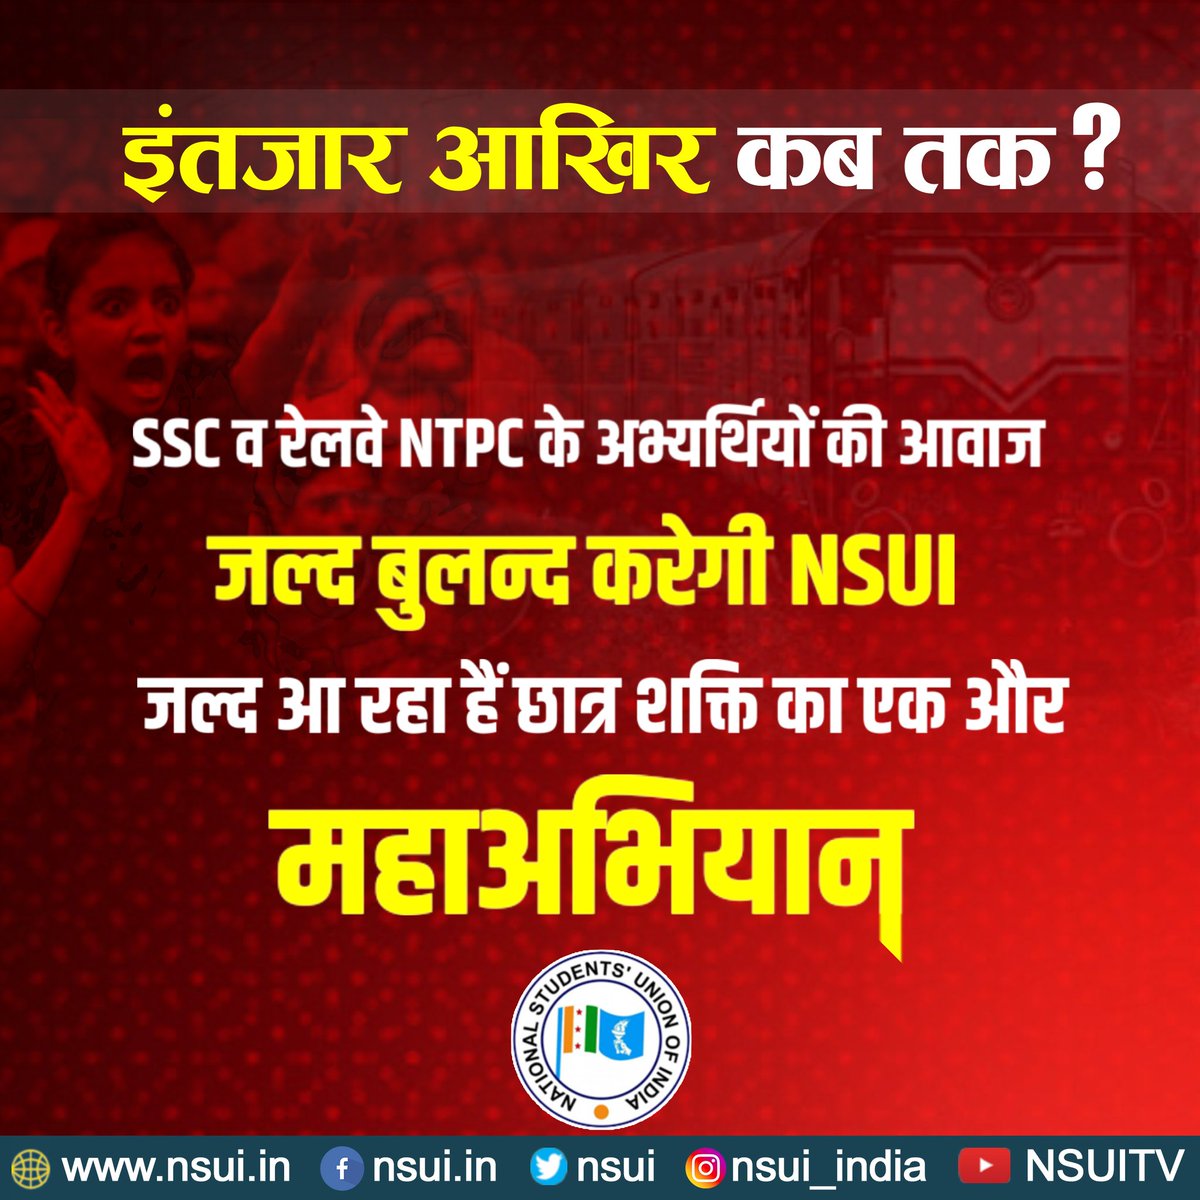 ◆Give joining letter to the candidates waiting since 2017. ◆Release the result & final merit list of the waiting candidates from 2018. ◆The money of 25 million students is with you since 2018, but why there is so much delay in Railways NTPC exam? #SpeakUpForSSCRailwayStudent